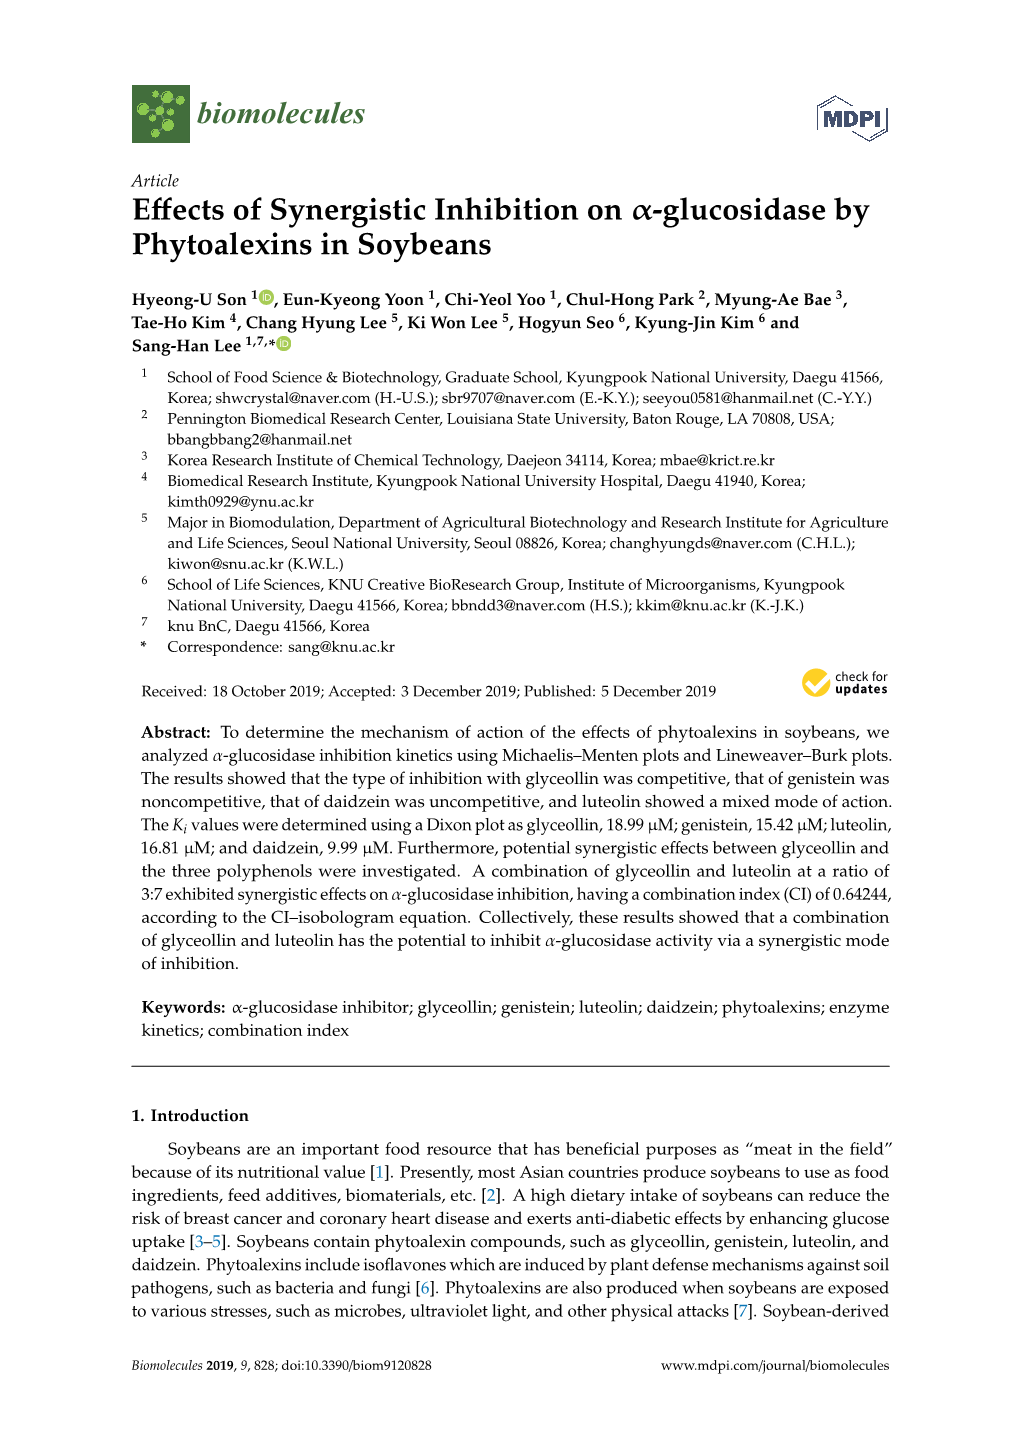 Effects of Synergistic Inhibition on Α-Glucosidase by Phytoalexins In